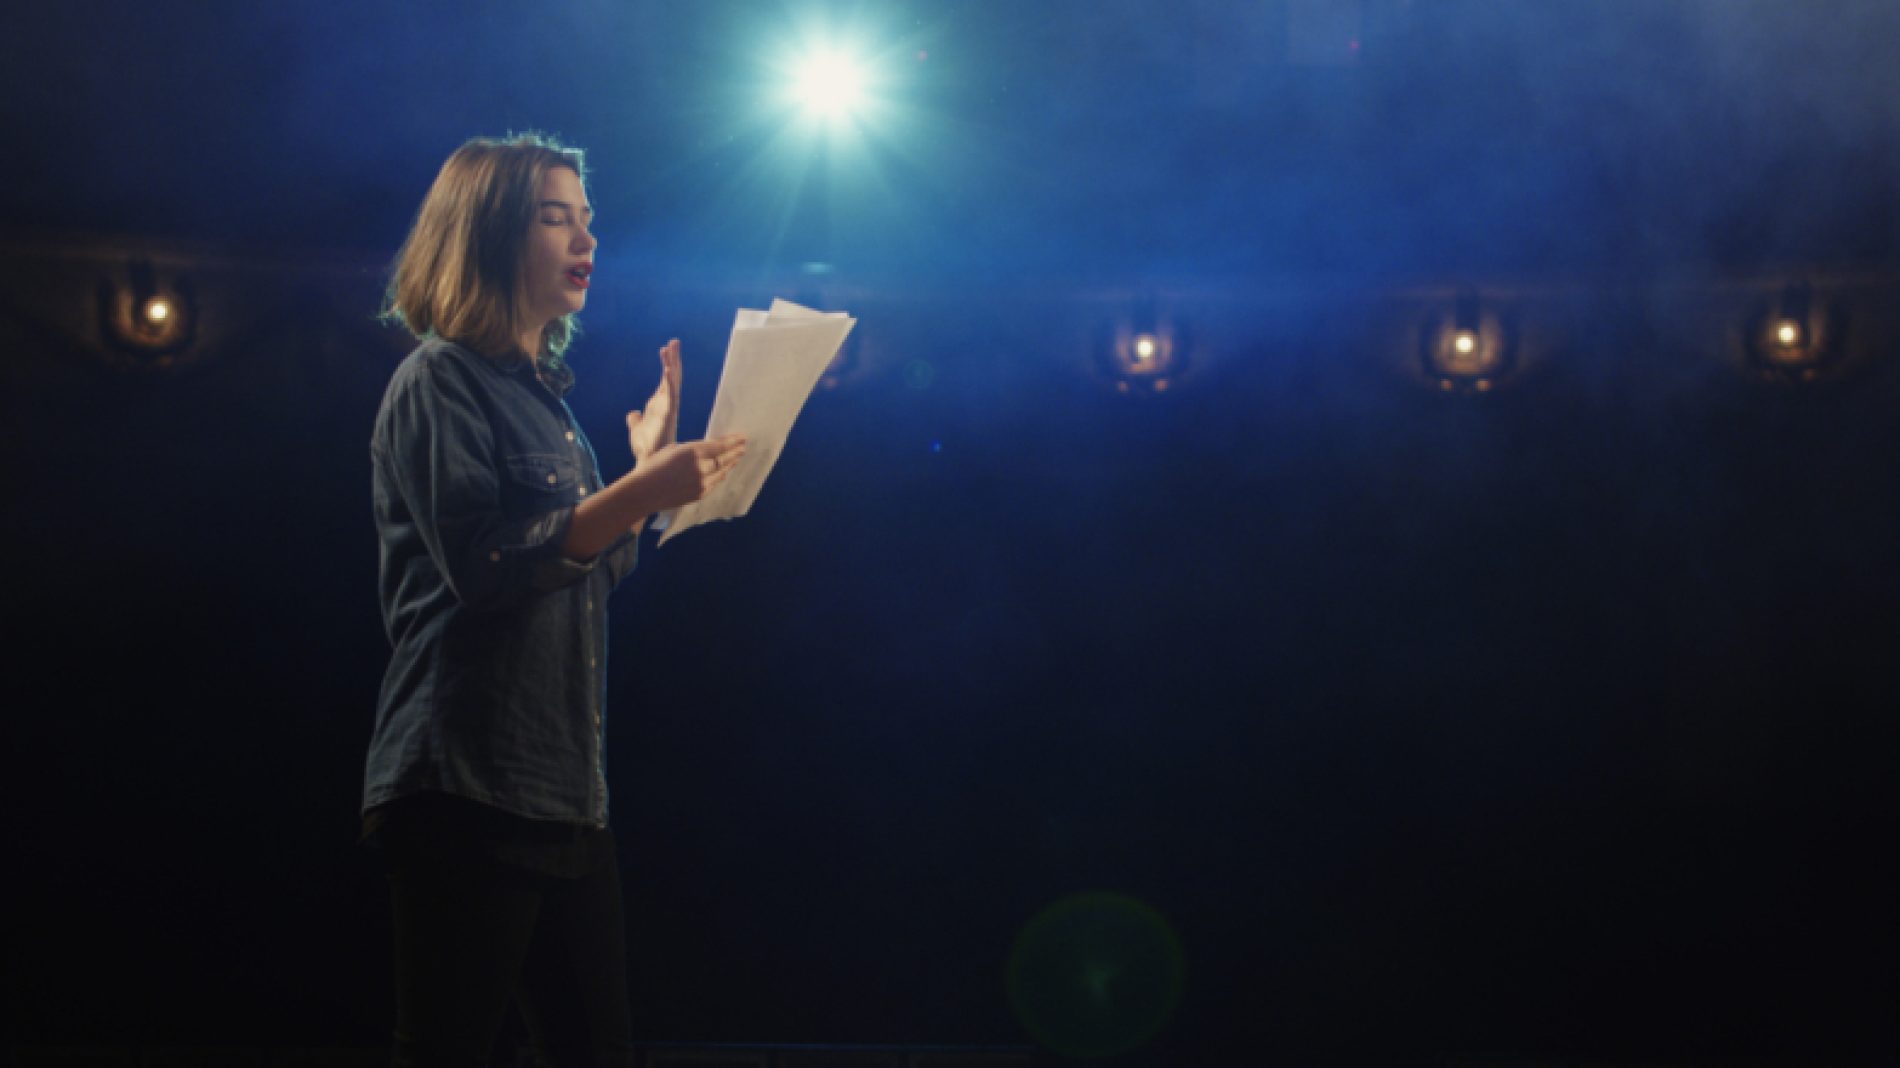 Young-woman-on-stage-with-script-DQzSeV